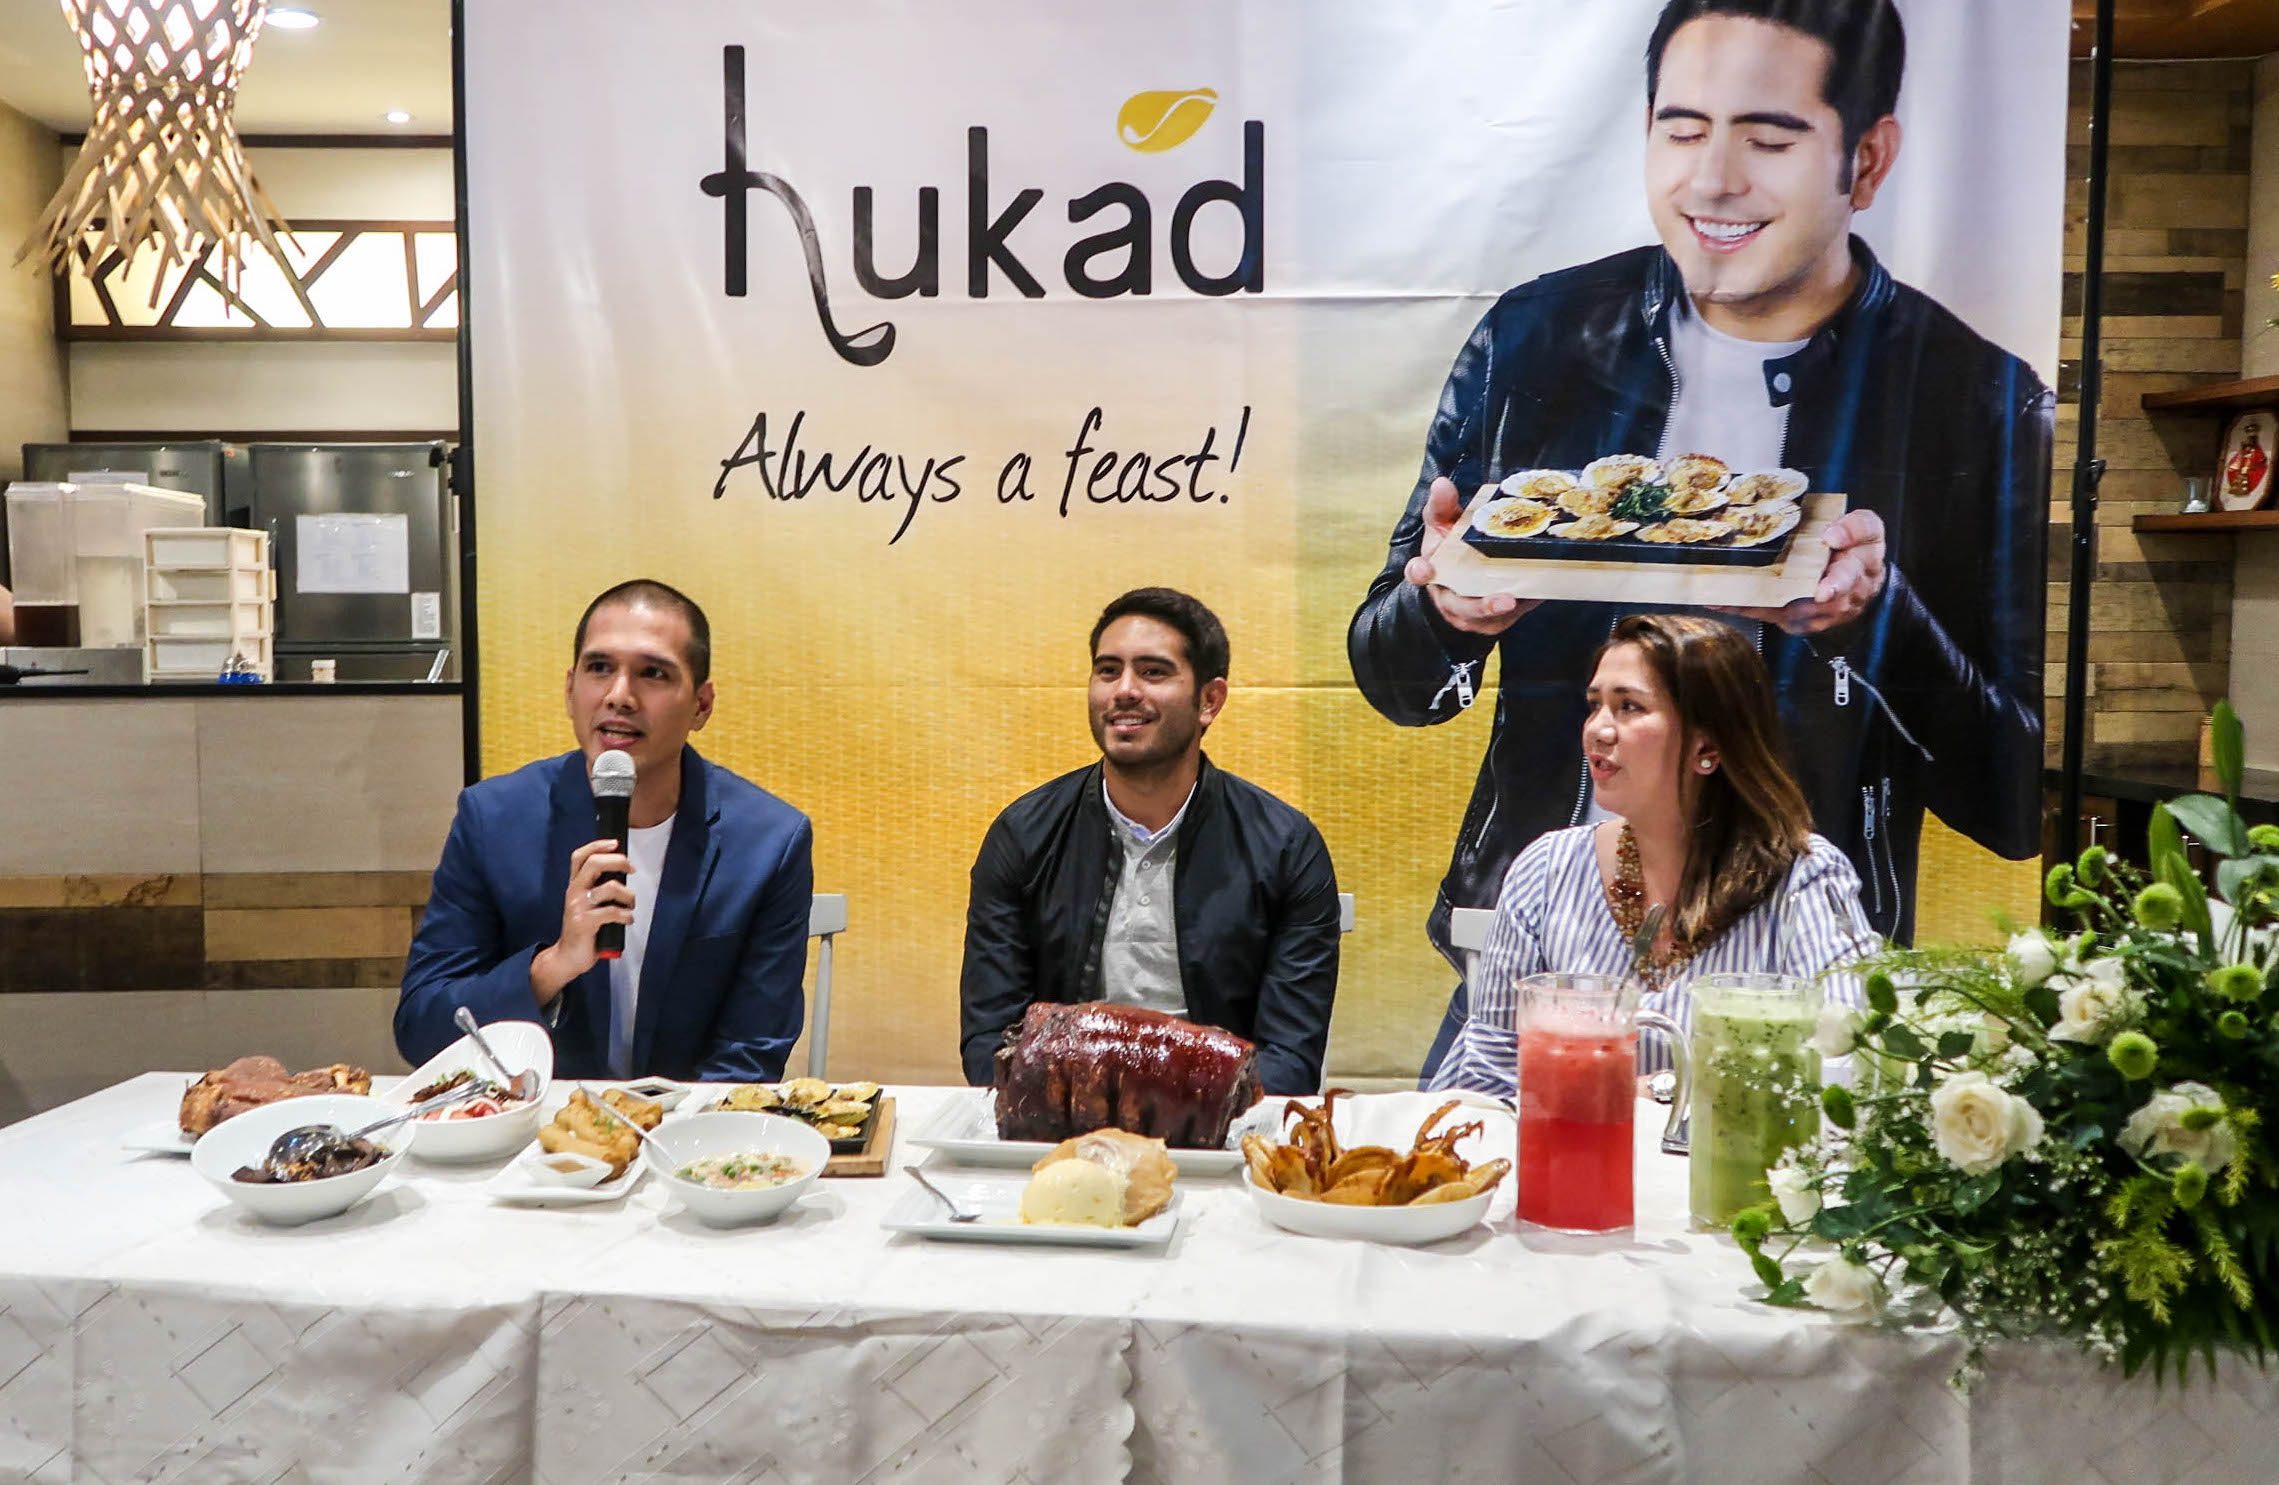 VisMin’s go-to restaurant for comfort food, Hukad, expands to Manila